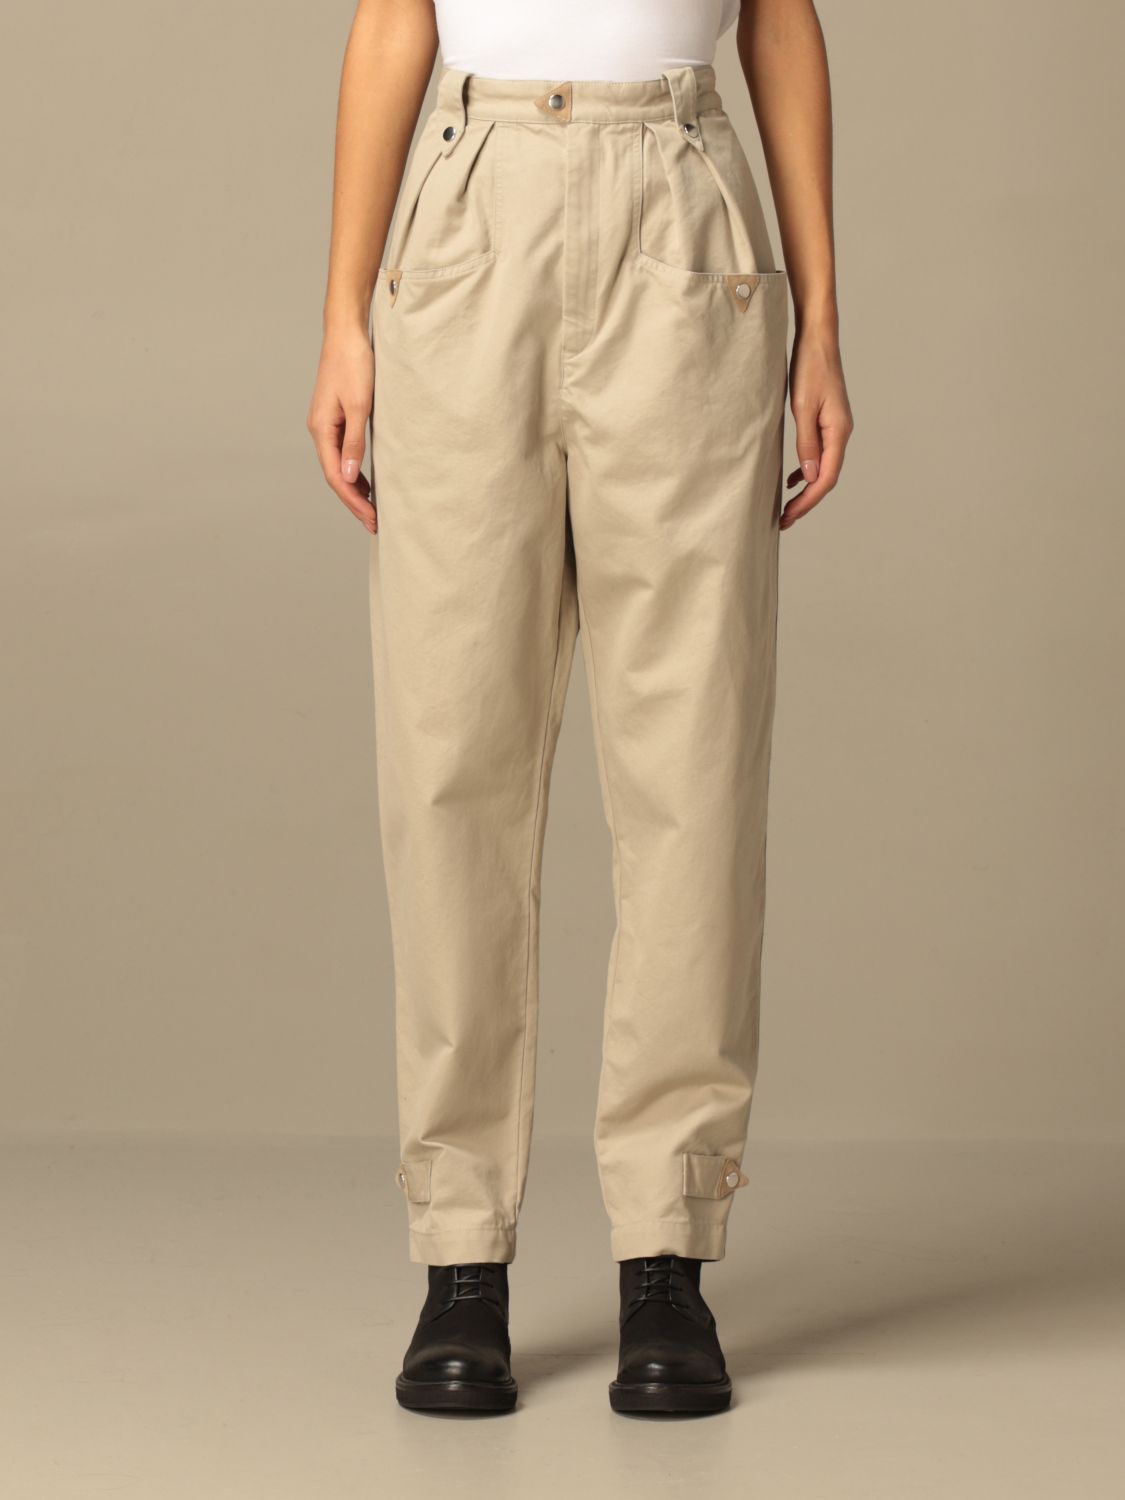 Isabel Marant Outlet: high-waisted trousers | Pants Isabel Marant Beige | Pants Isabel Marant PA170820A030E GIGLIO.COM